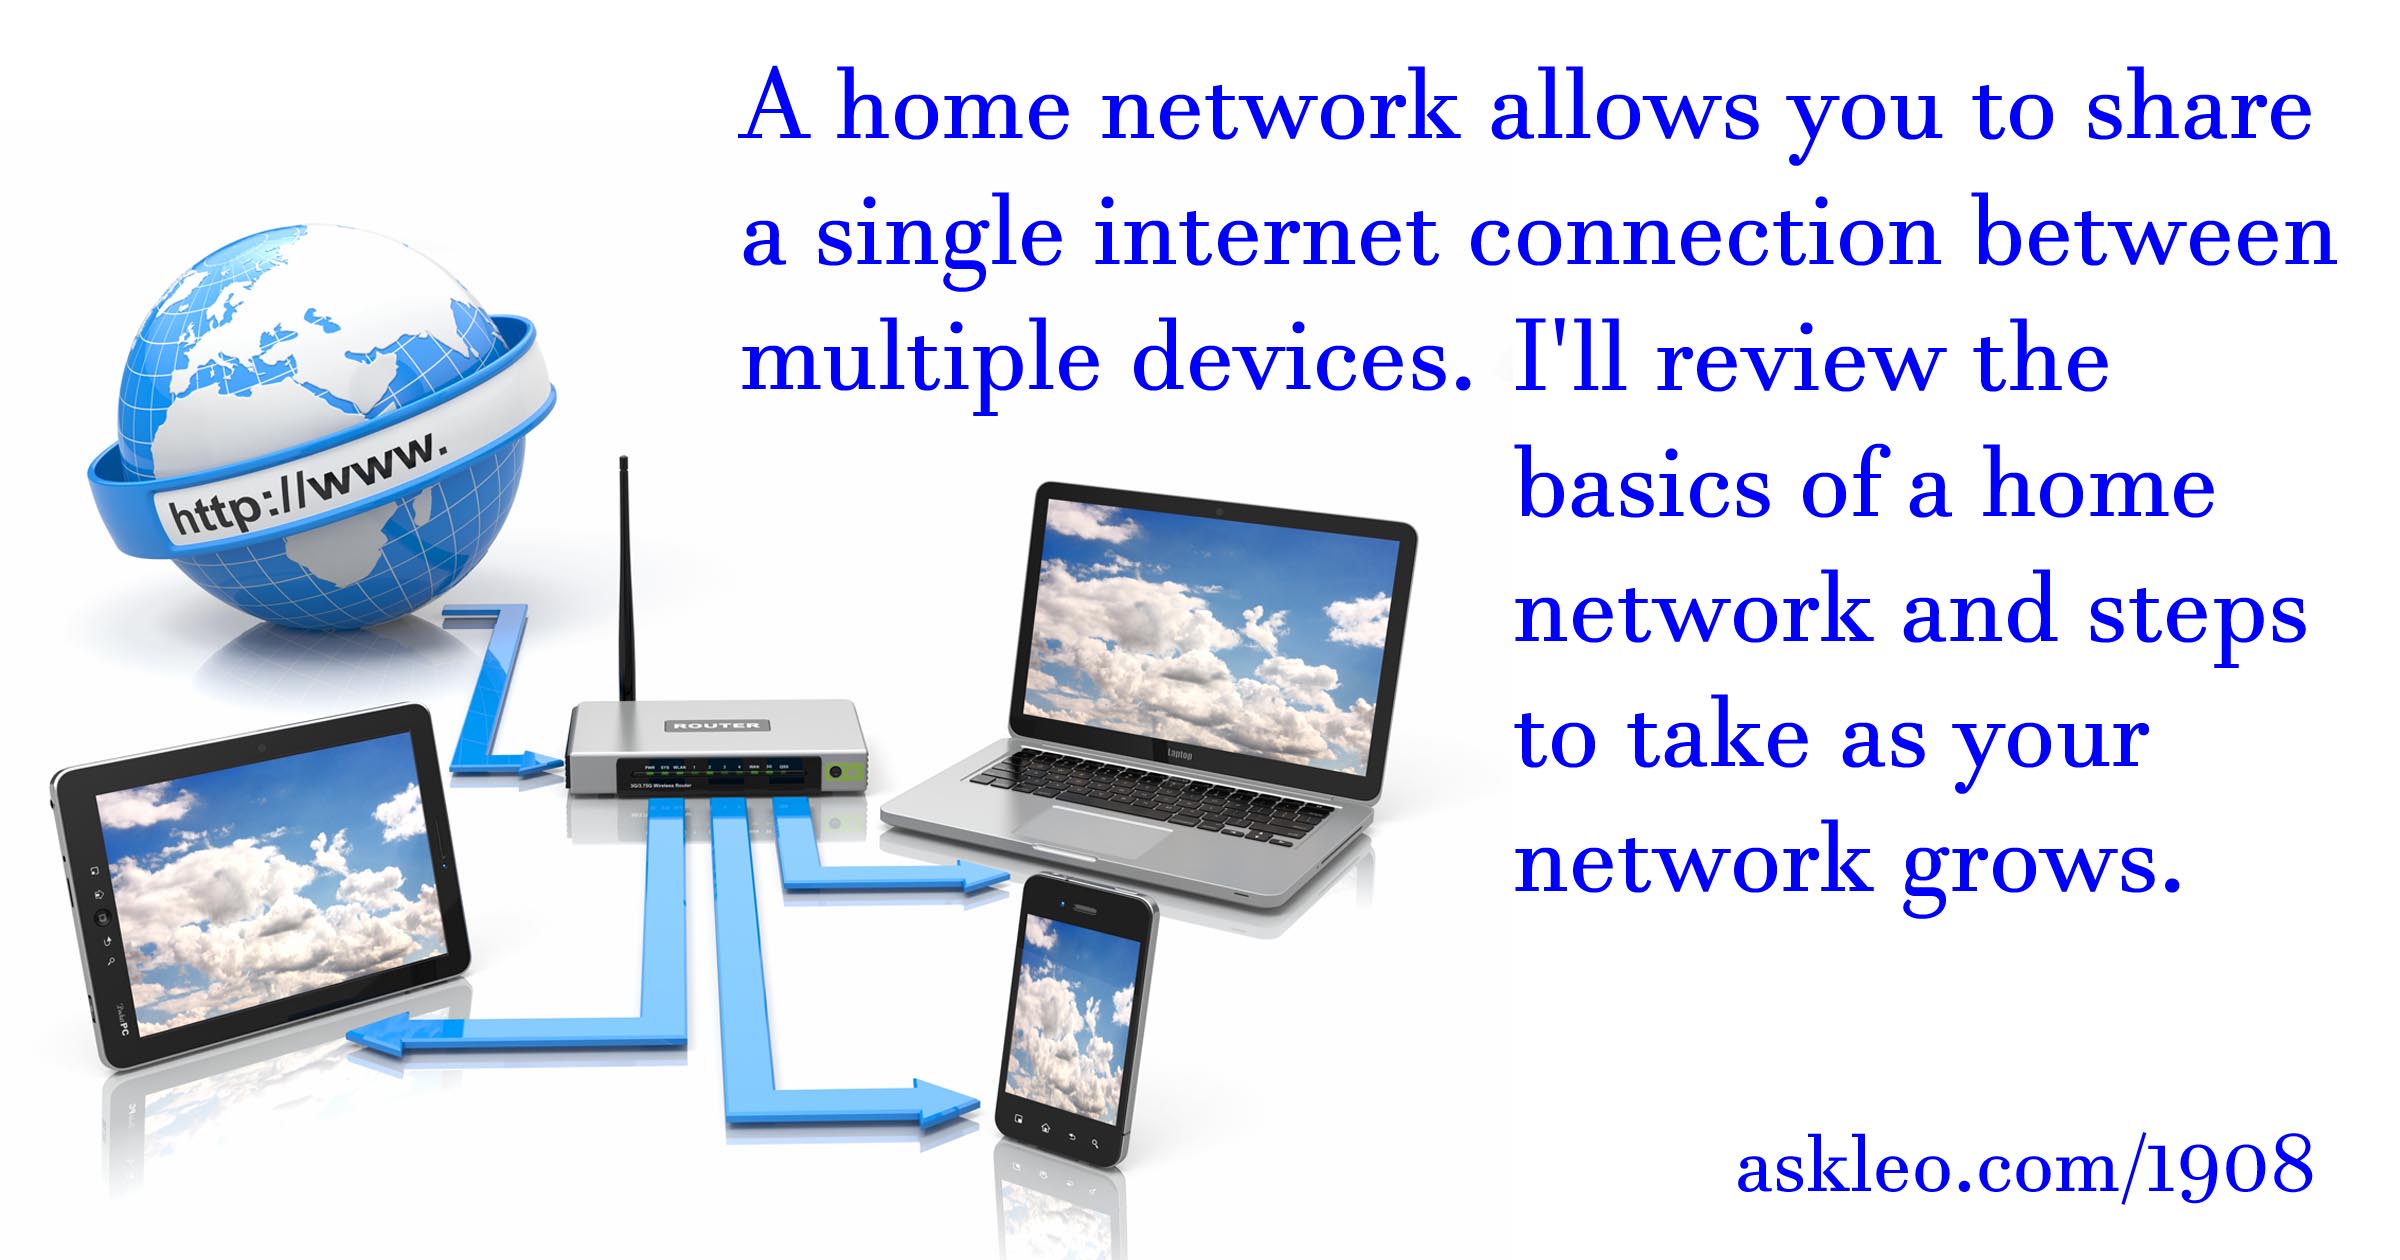 Ensure that your device is connected to a stable and reliable internet connection.
Check if other devices on the same network can access the internet.